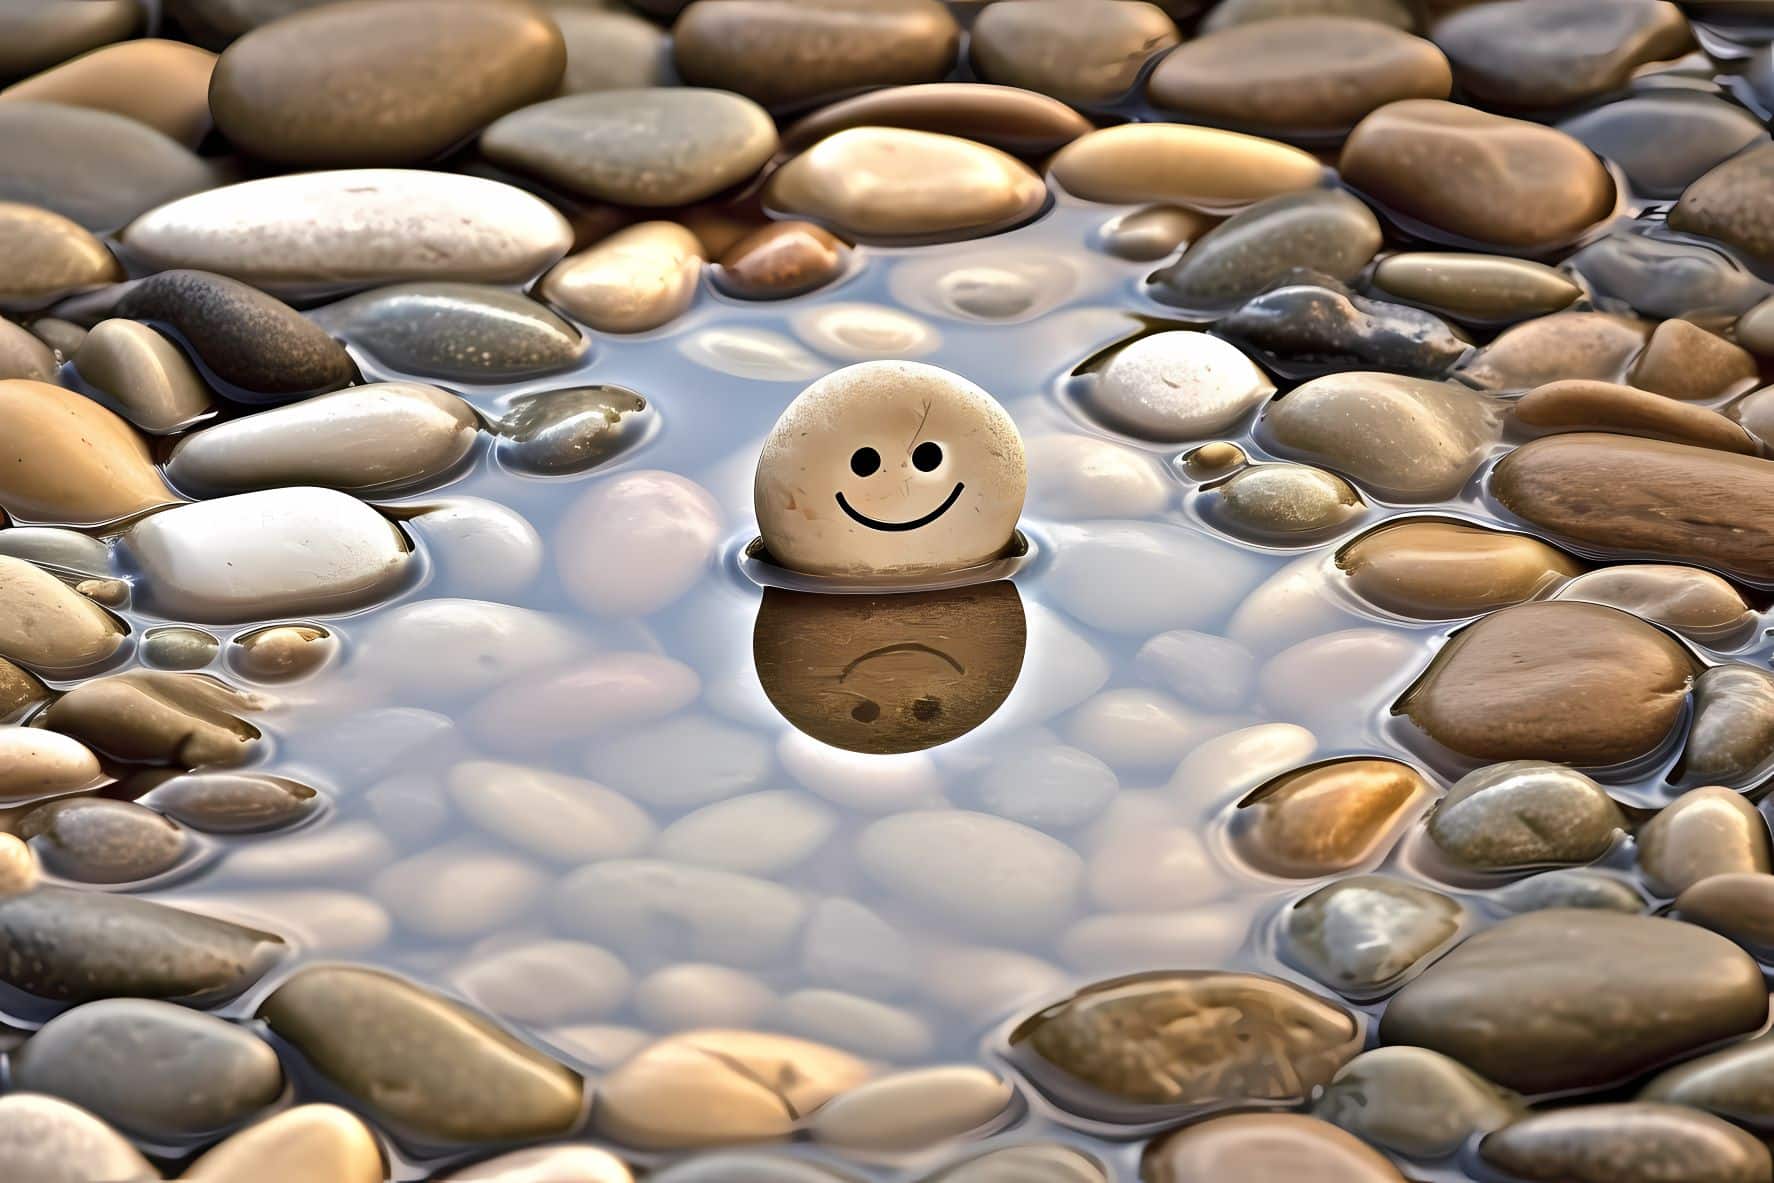 The Ripple Effect of Optimism